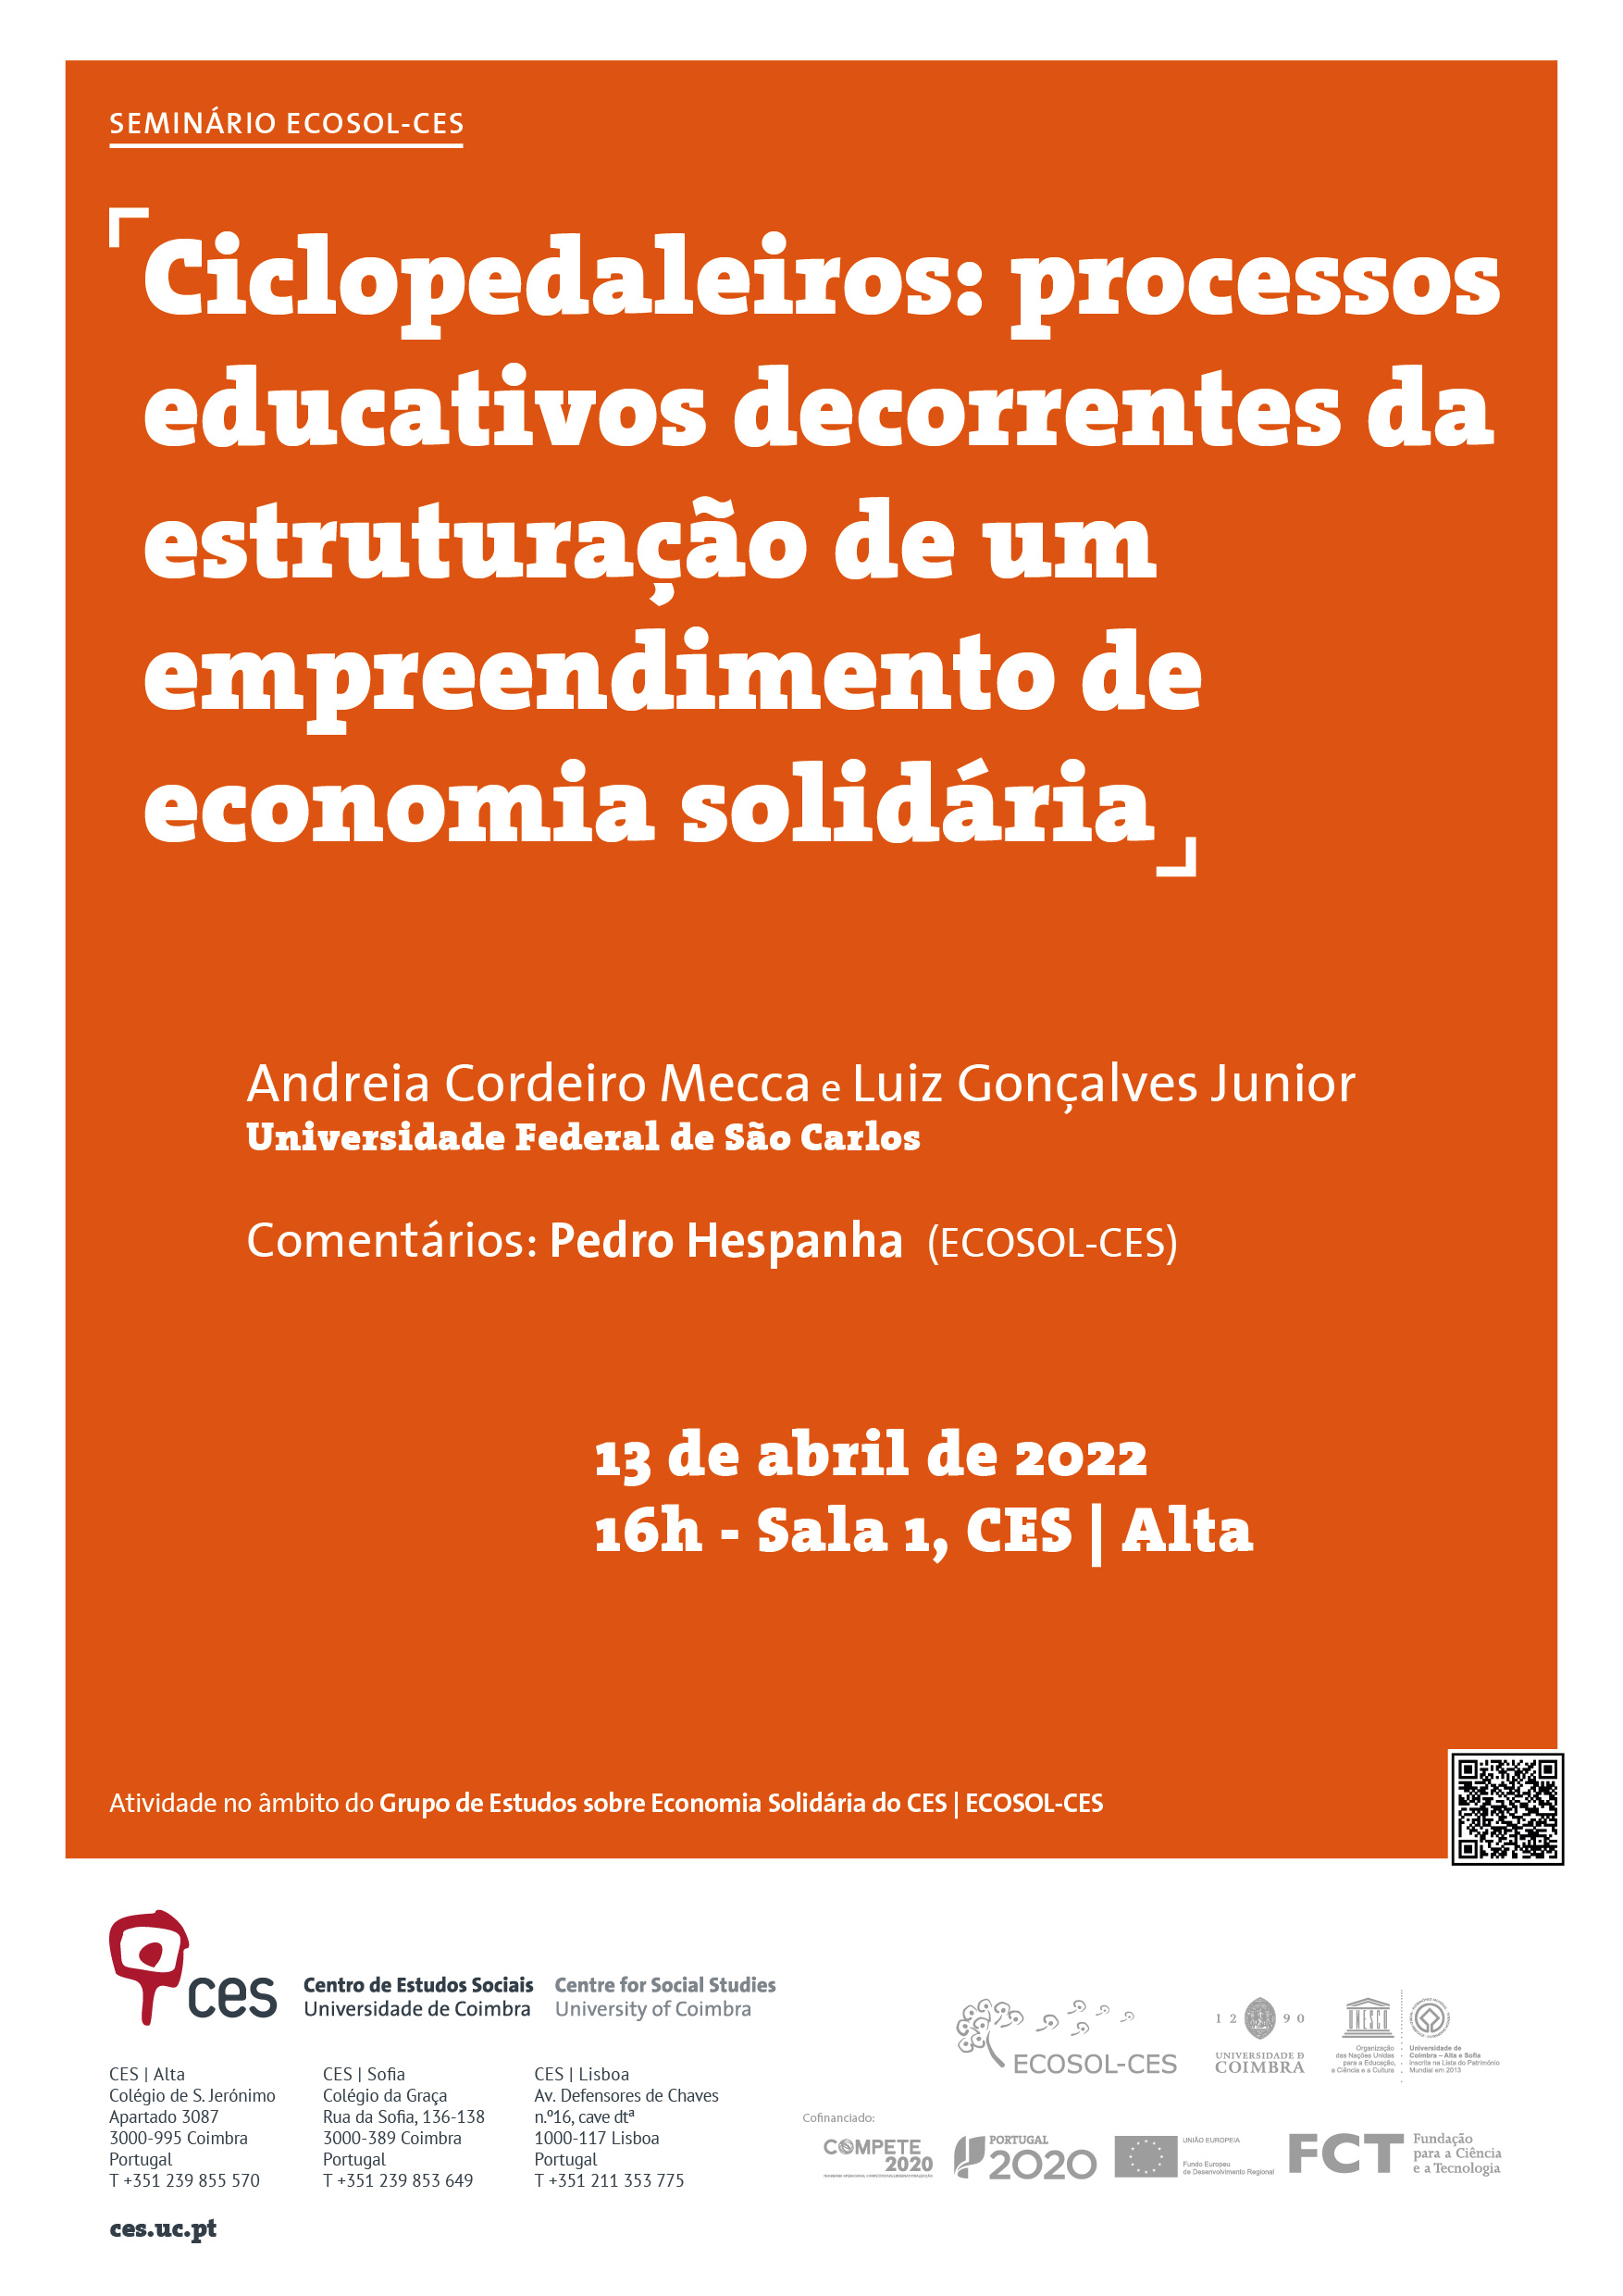 Ciclopedaleiros: educational processes arising from the structuring of a solidarity economy enterprise<span id="edit_37553"><script>$(function() { $('#edit_37553').load( "/myces/user/editobj.php?tipo=evento&id=37553" ); });</script></span>